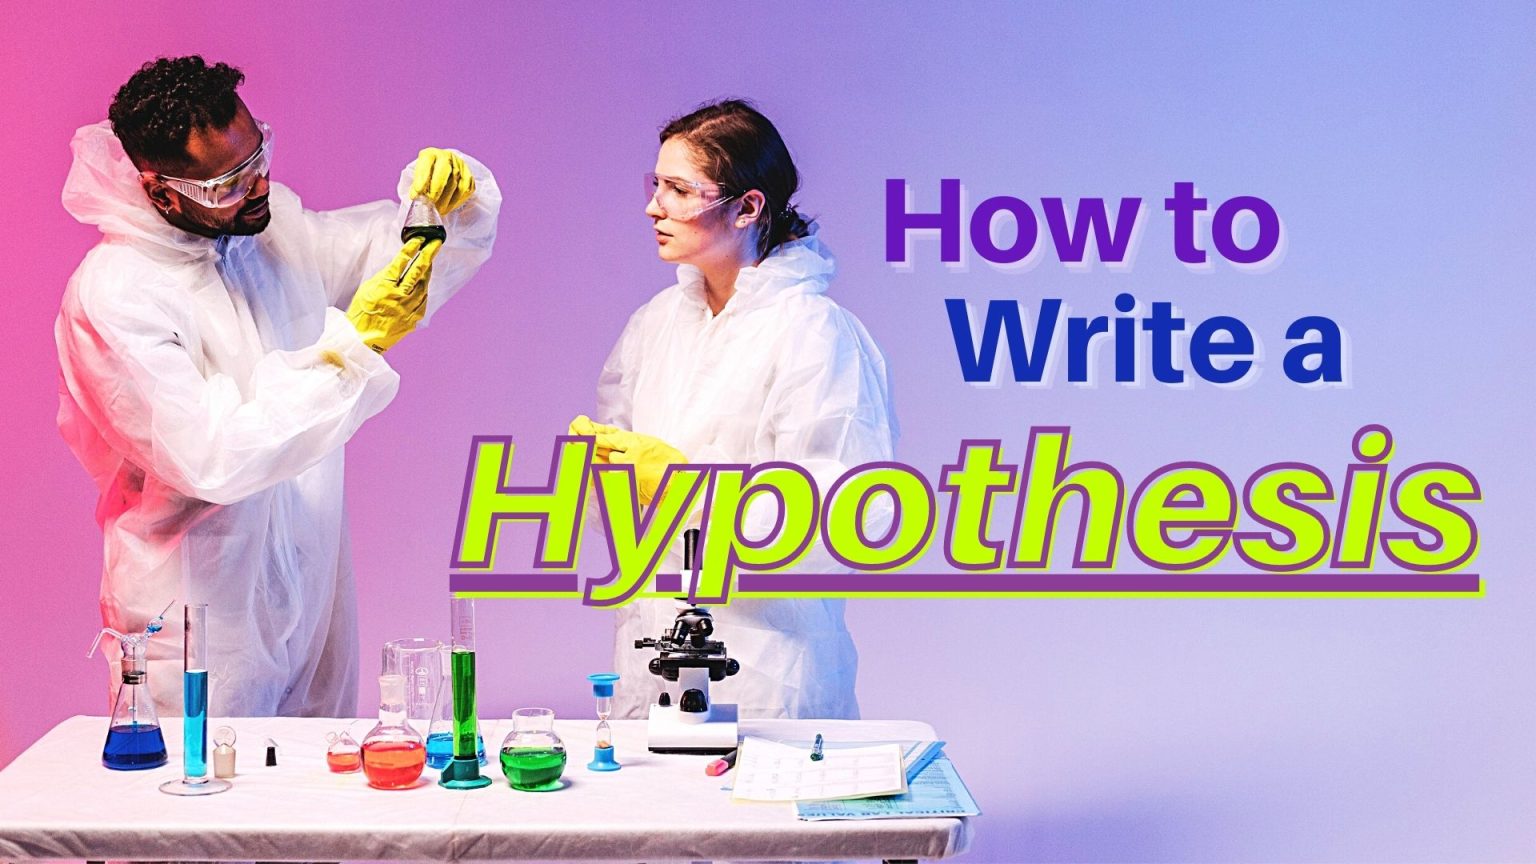 how to write hypothesis for biology ia